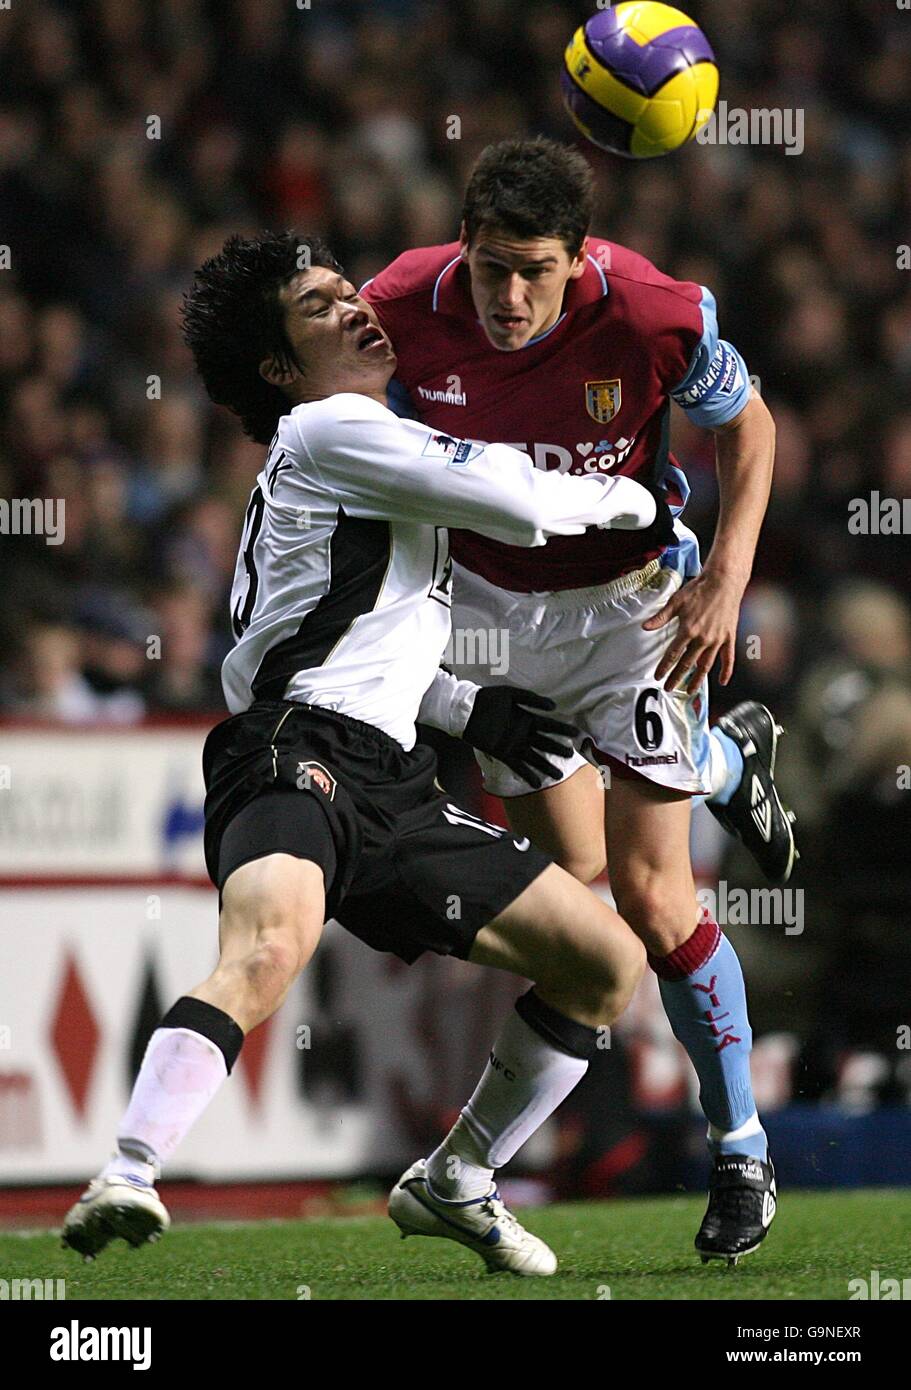 Aston Villa's Gareth Barry (r) and Manchester United's Ji-Sung Park battle for the ball Stock Photo